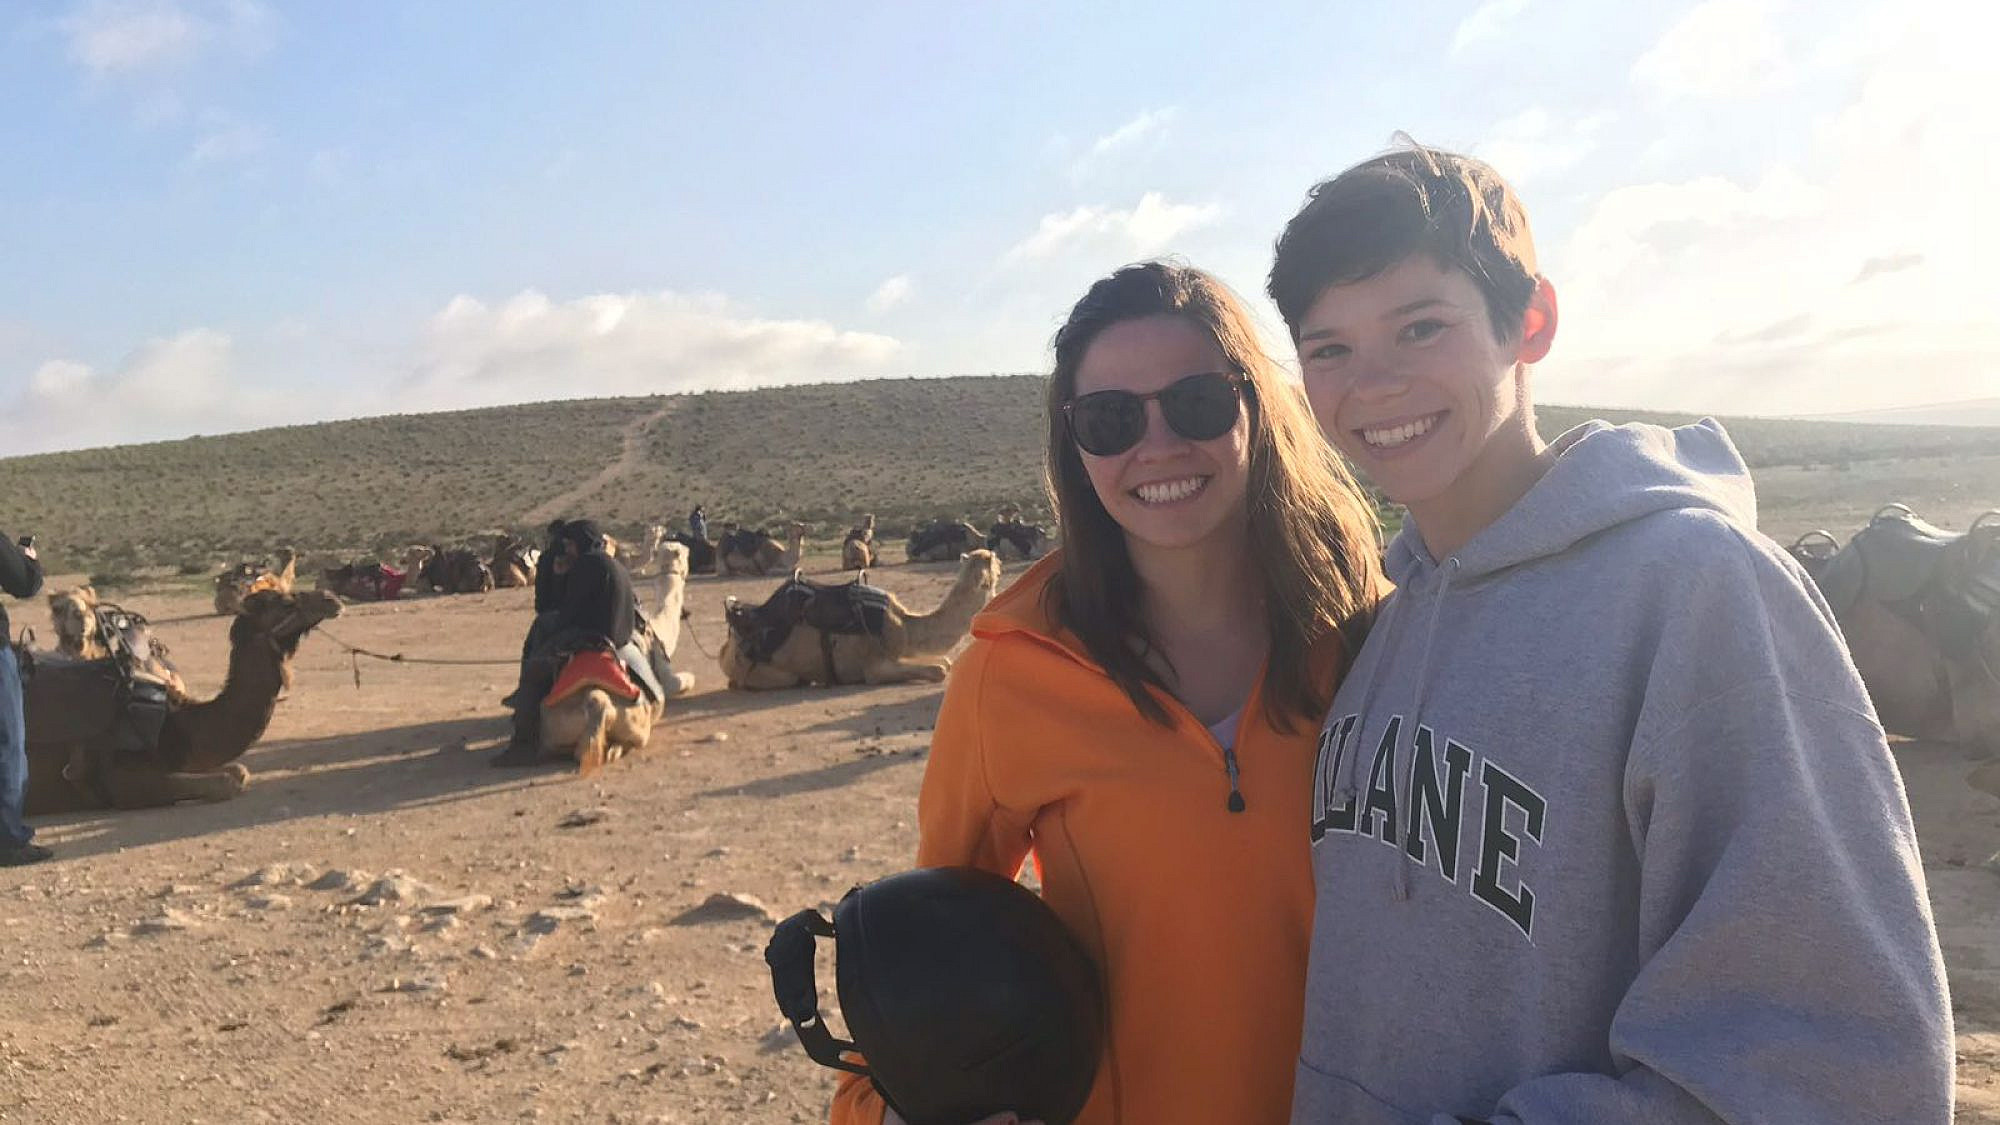 Natalie (right) and Katherine (left) Dubin pose in front of a Birthright staple: camel rides. Credit: Natalie Dubin.